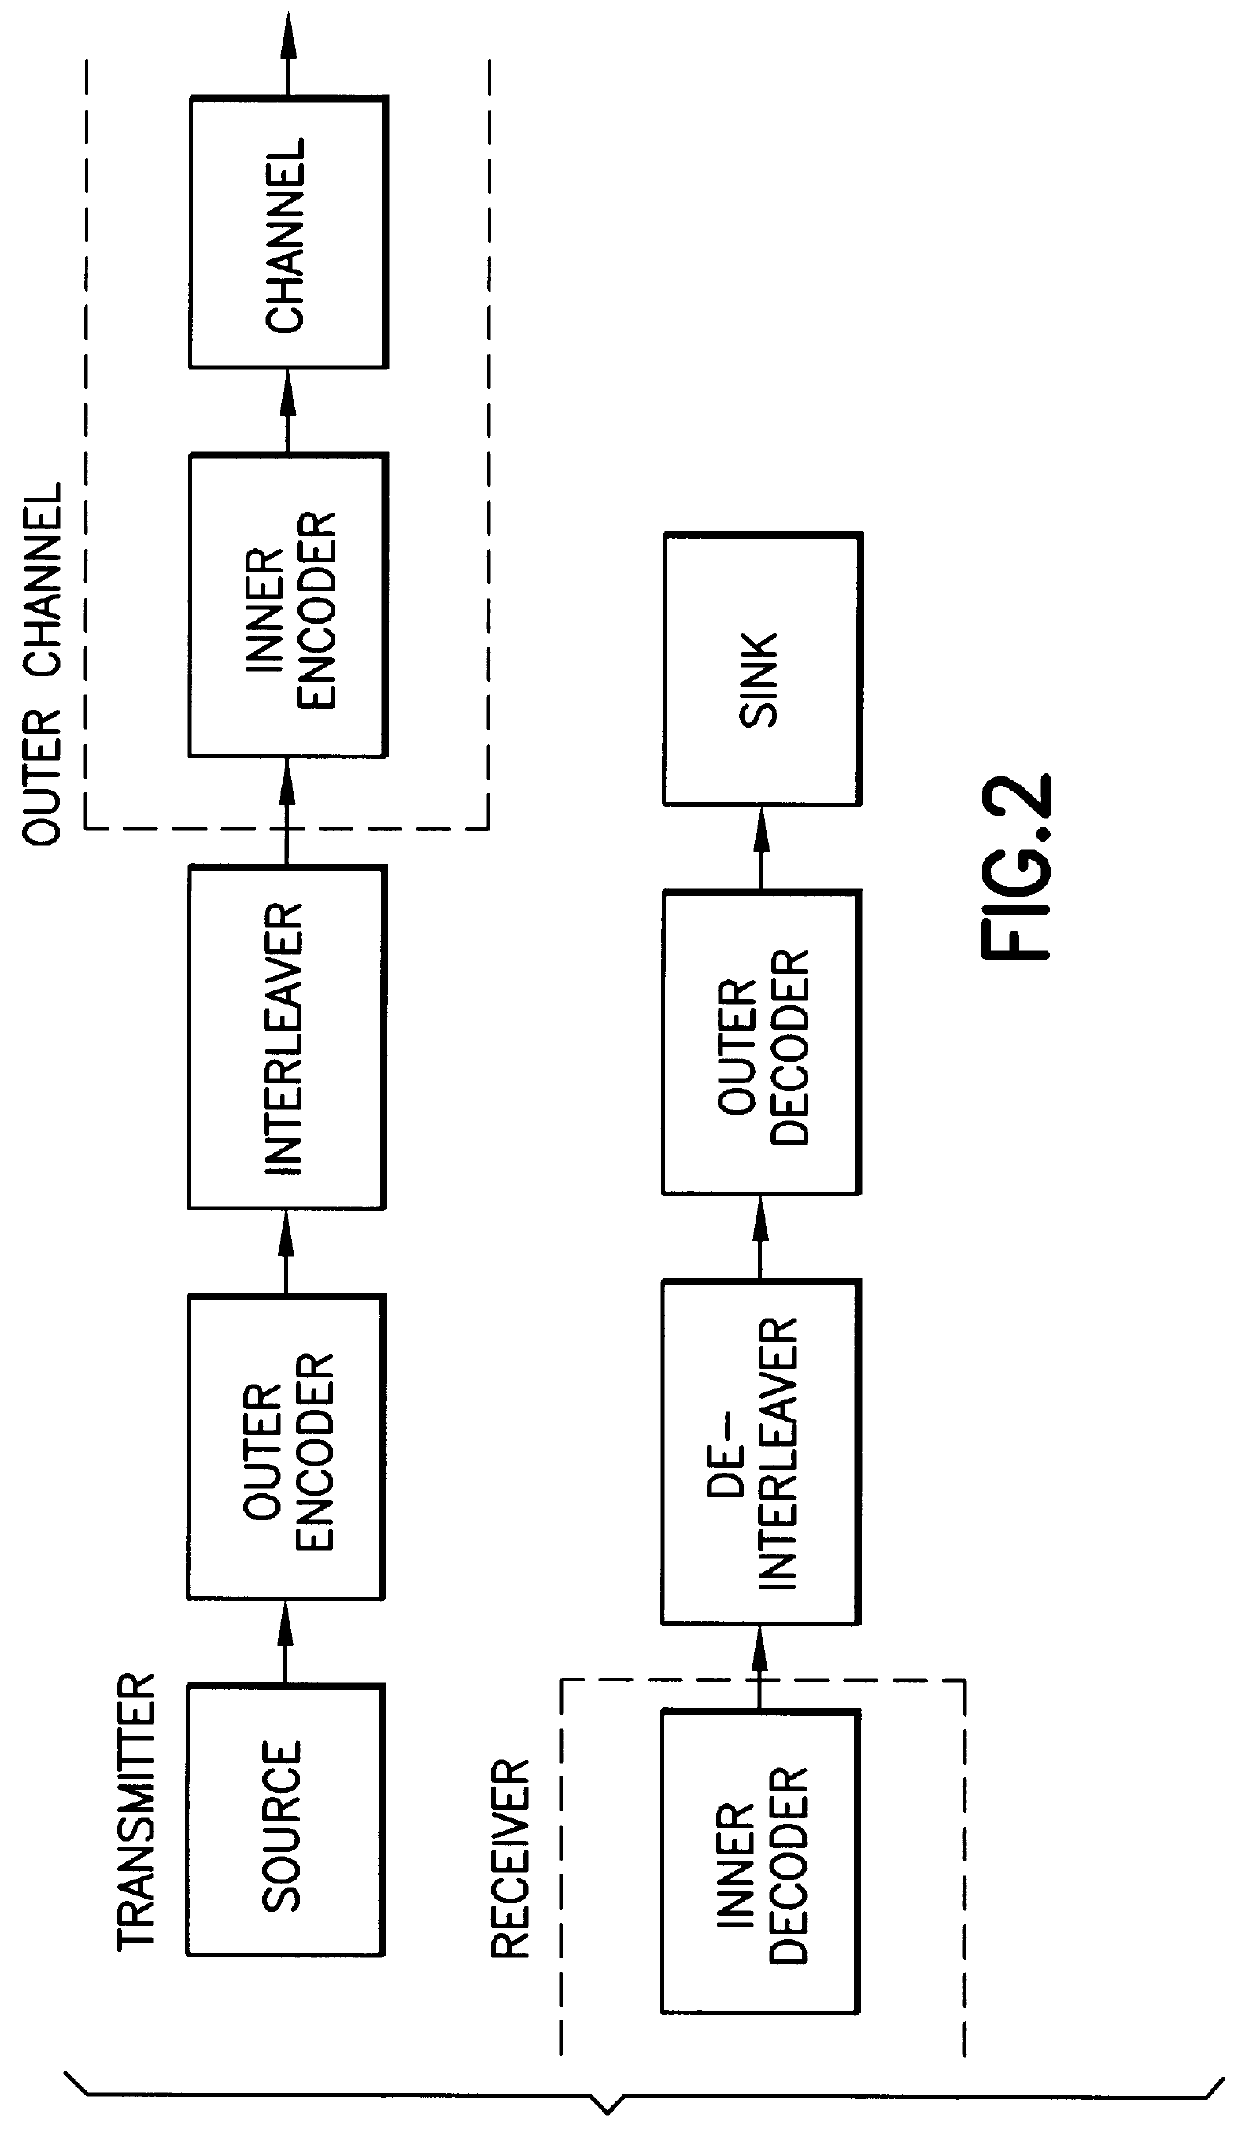 System and method for error correcting a received data stream in a concatenated system